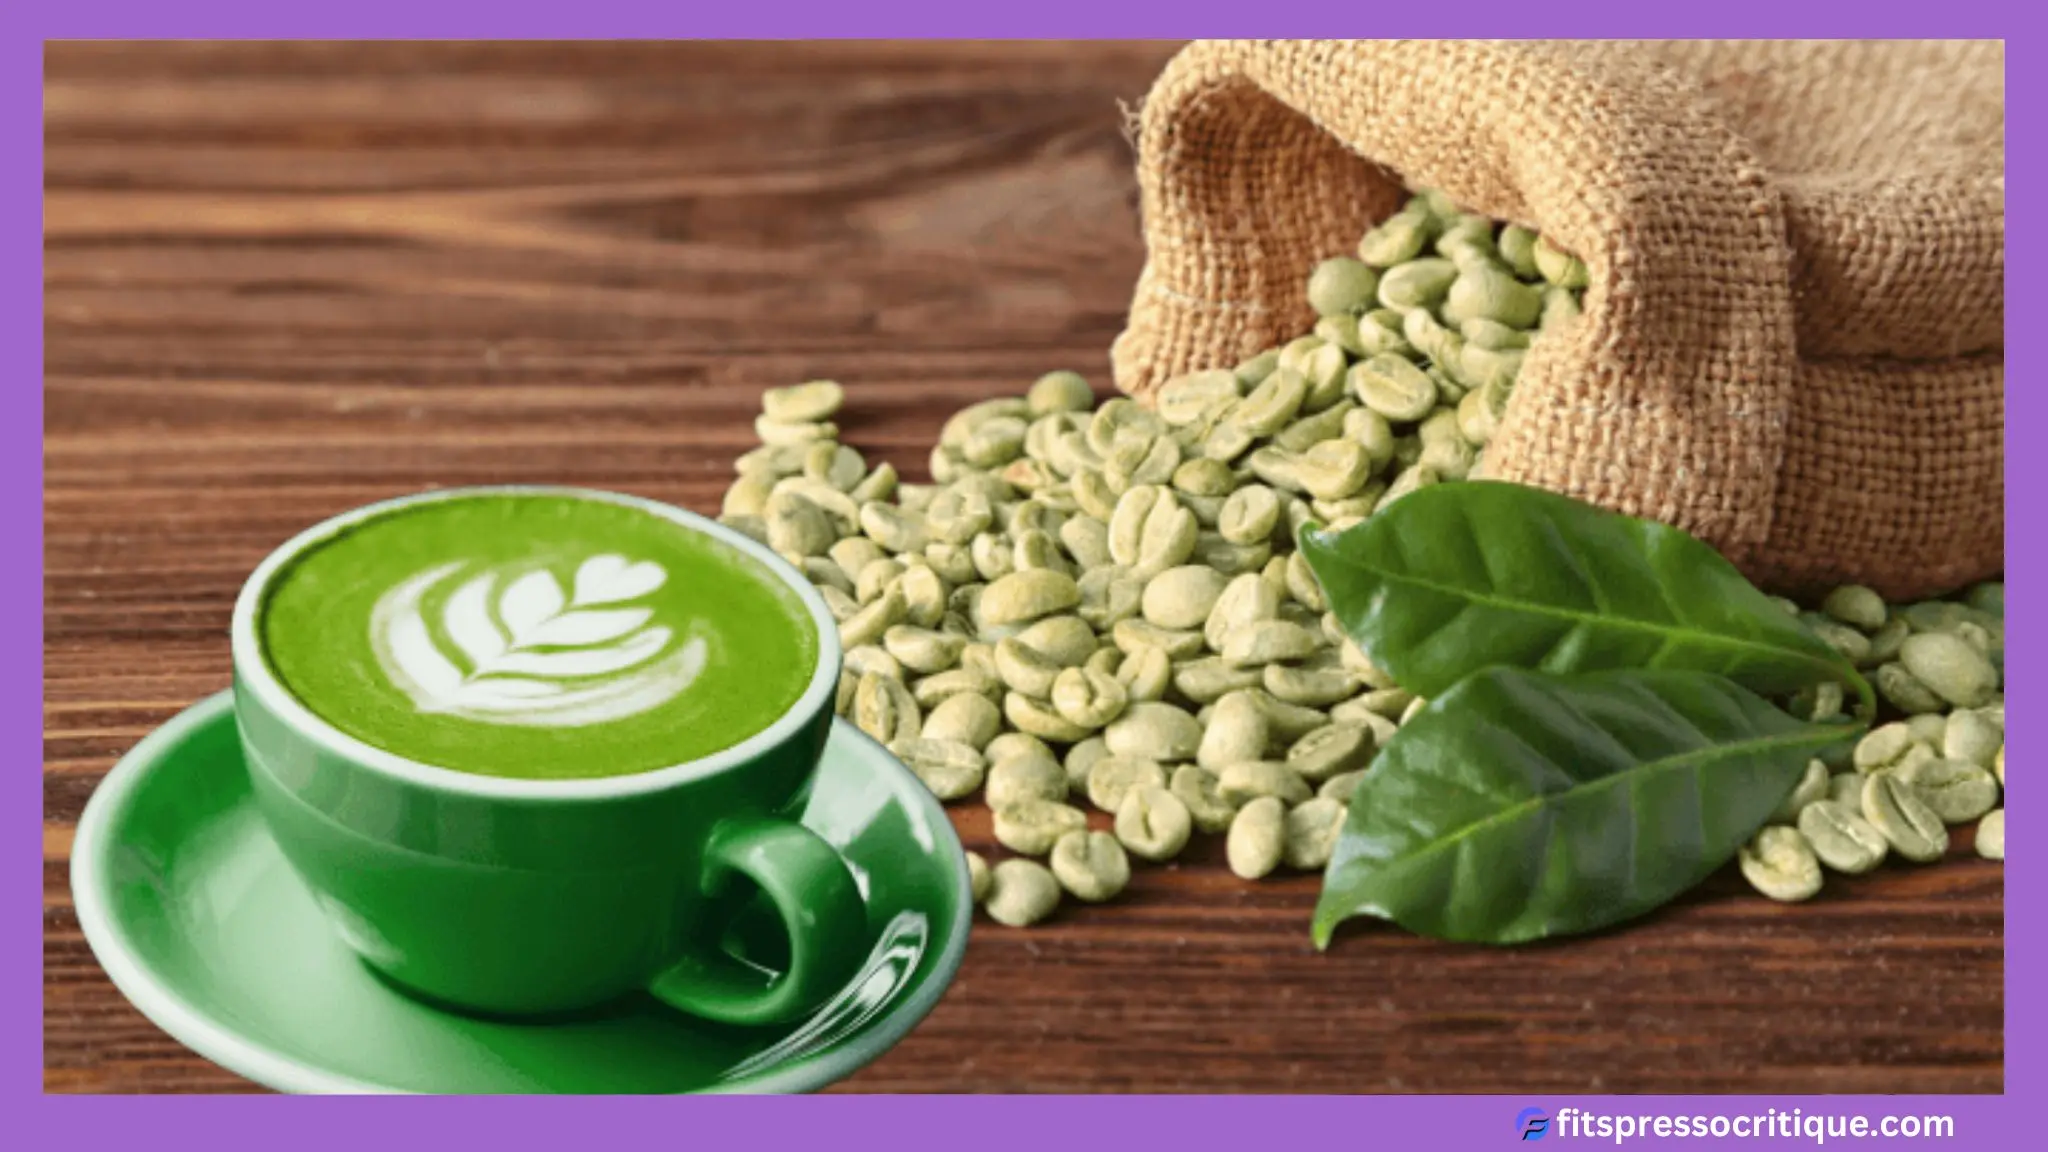 Green Coffee For Weight Loss